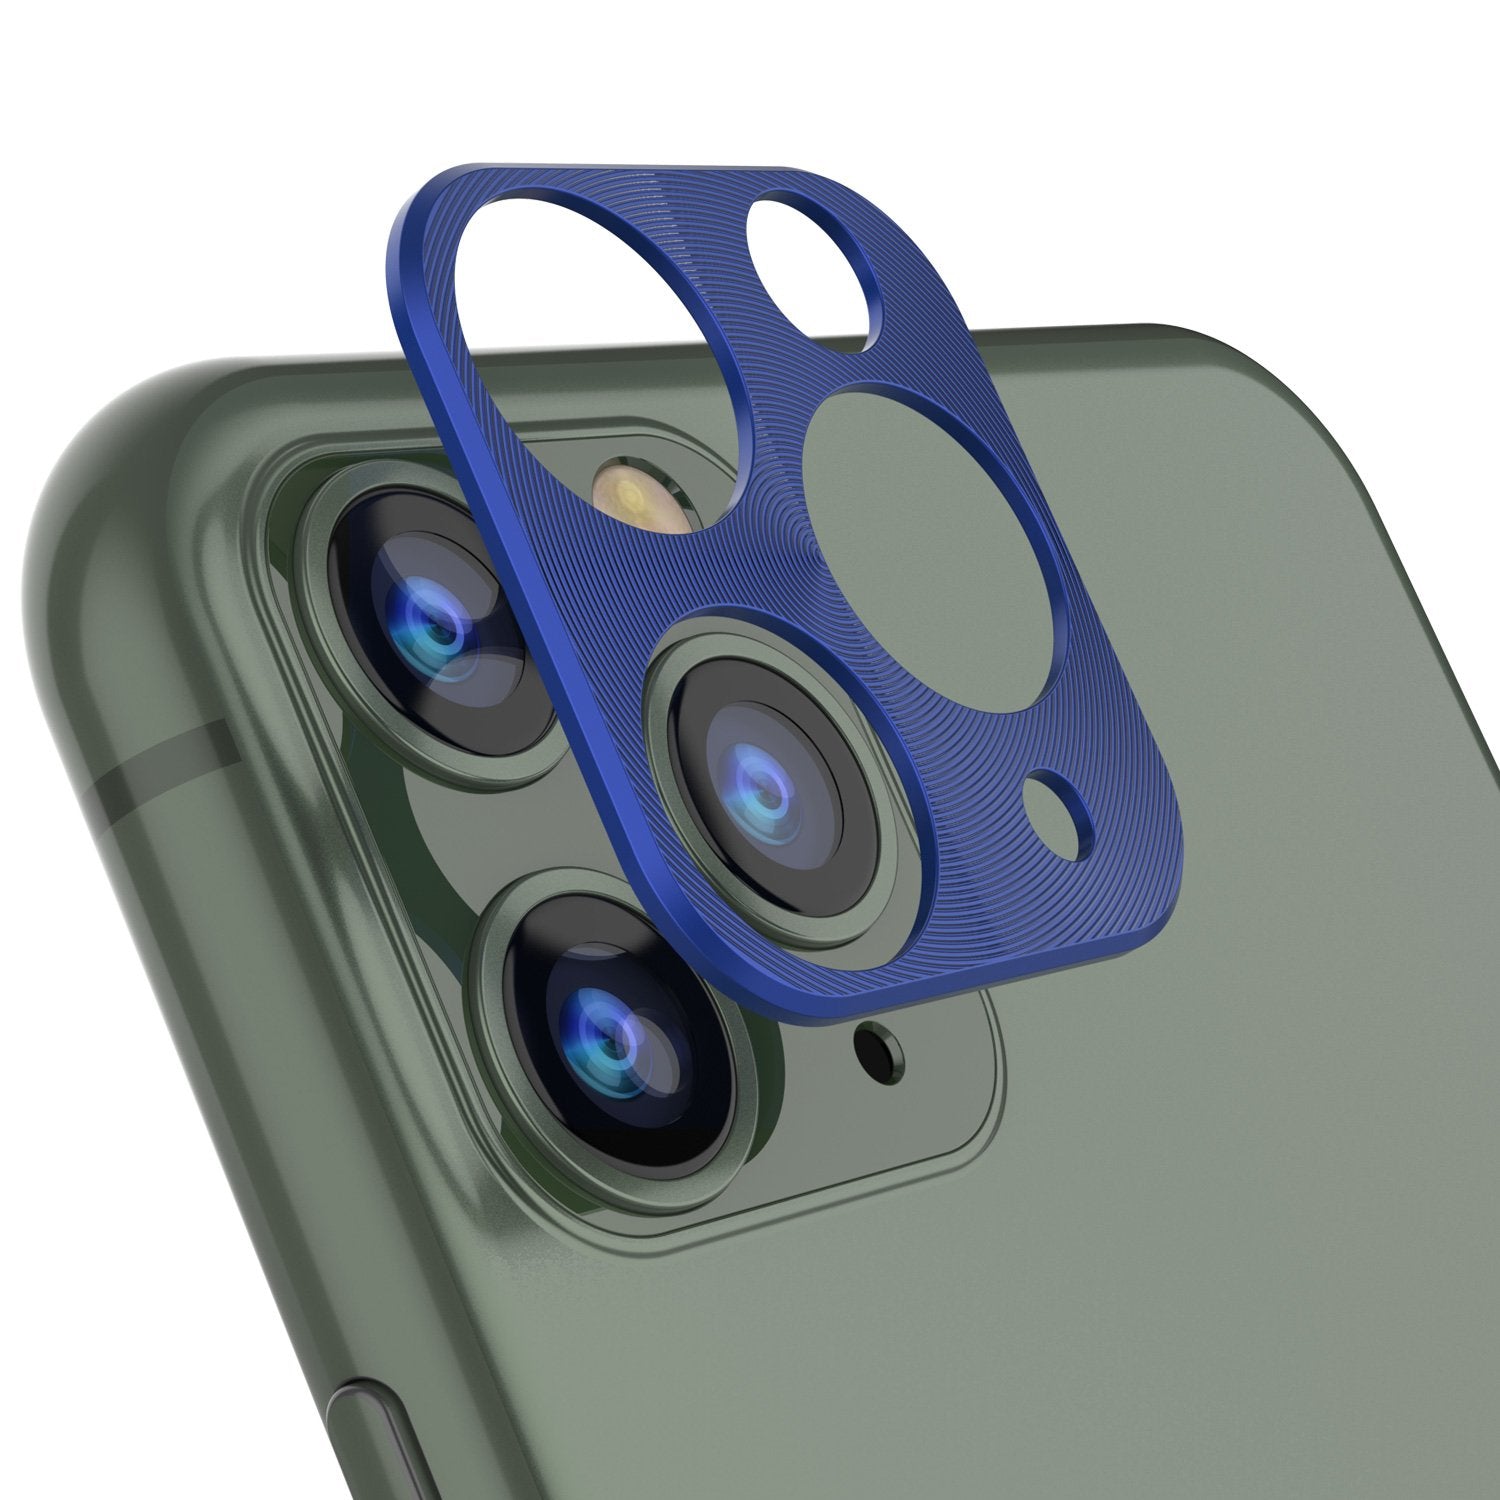 Punkcase iPhone 11 Pro Max Camera Protector Ring [Blue]